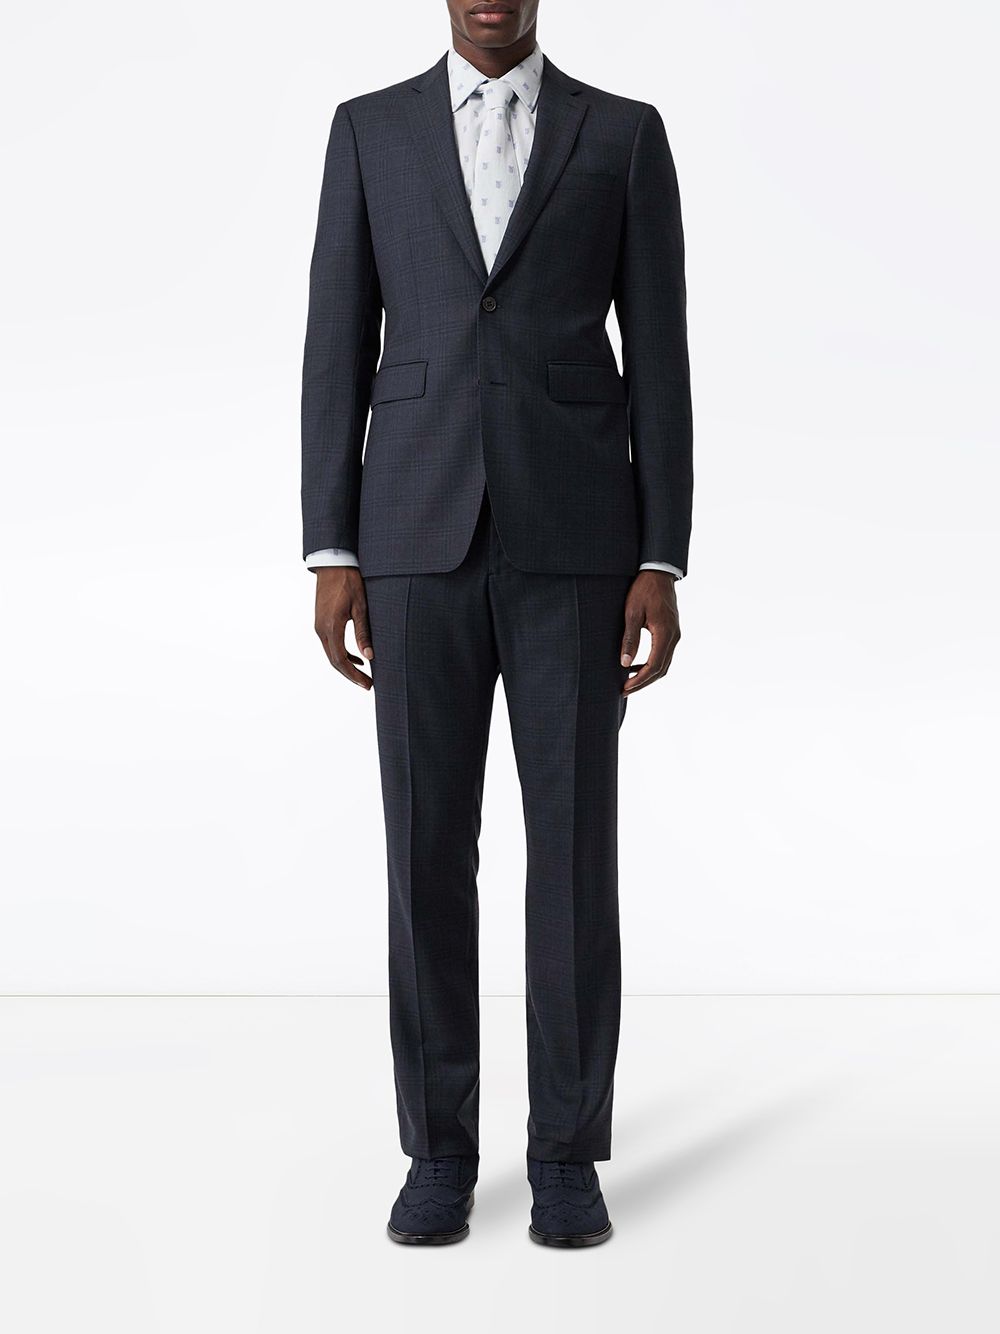 Burberry Classic Fit Windowpane Check Wool Suit - Farfetch